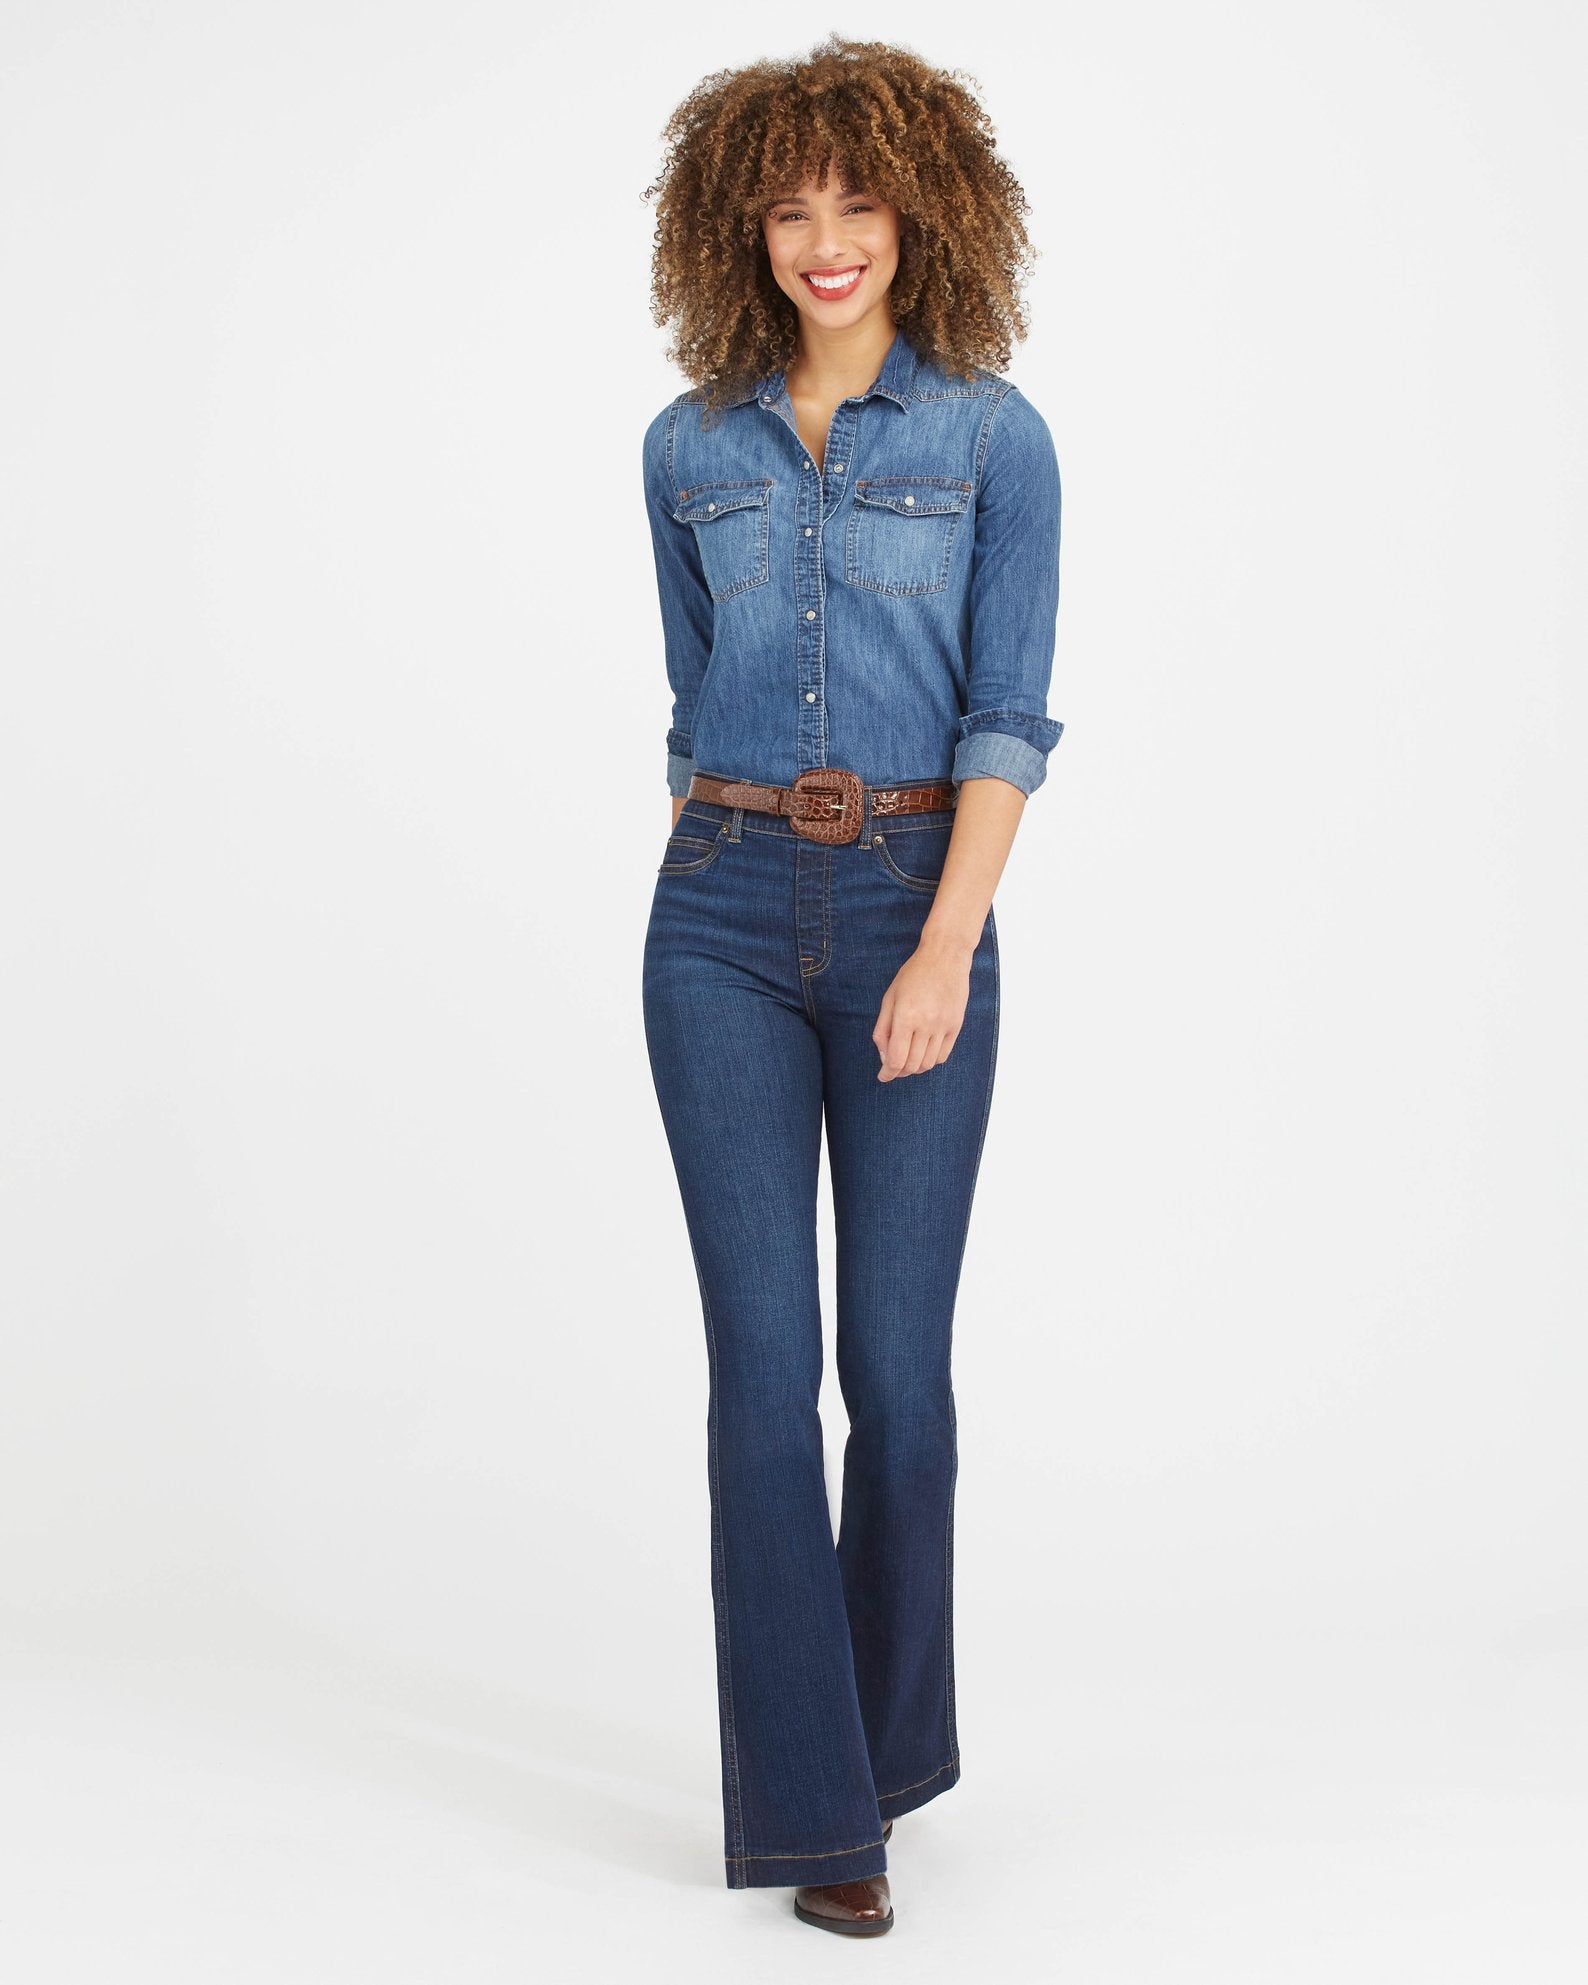 SPANX FLARE JEANS IN MIDNIGHT SHADE